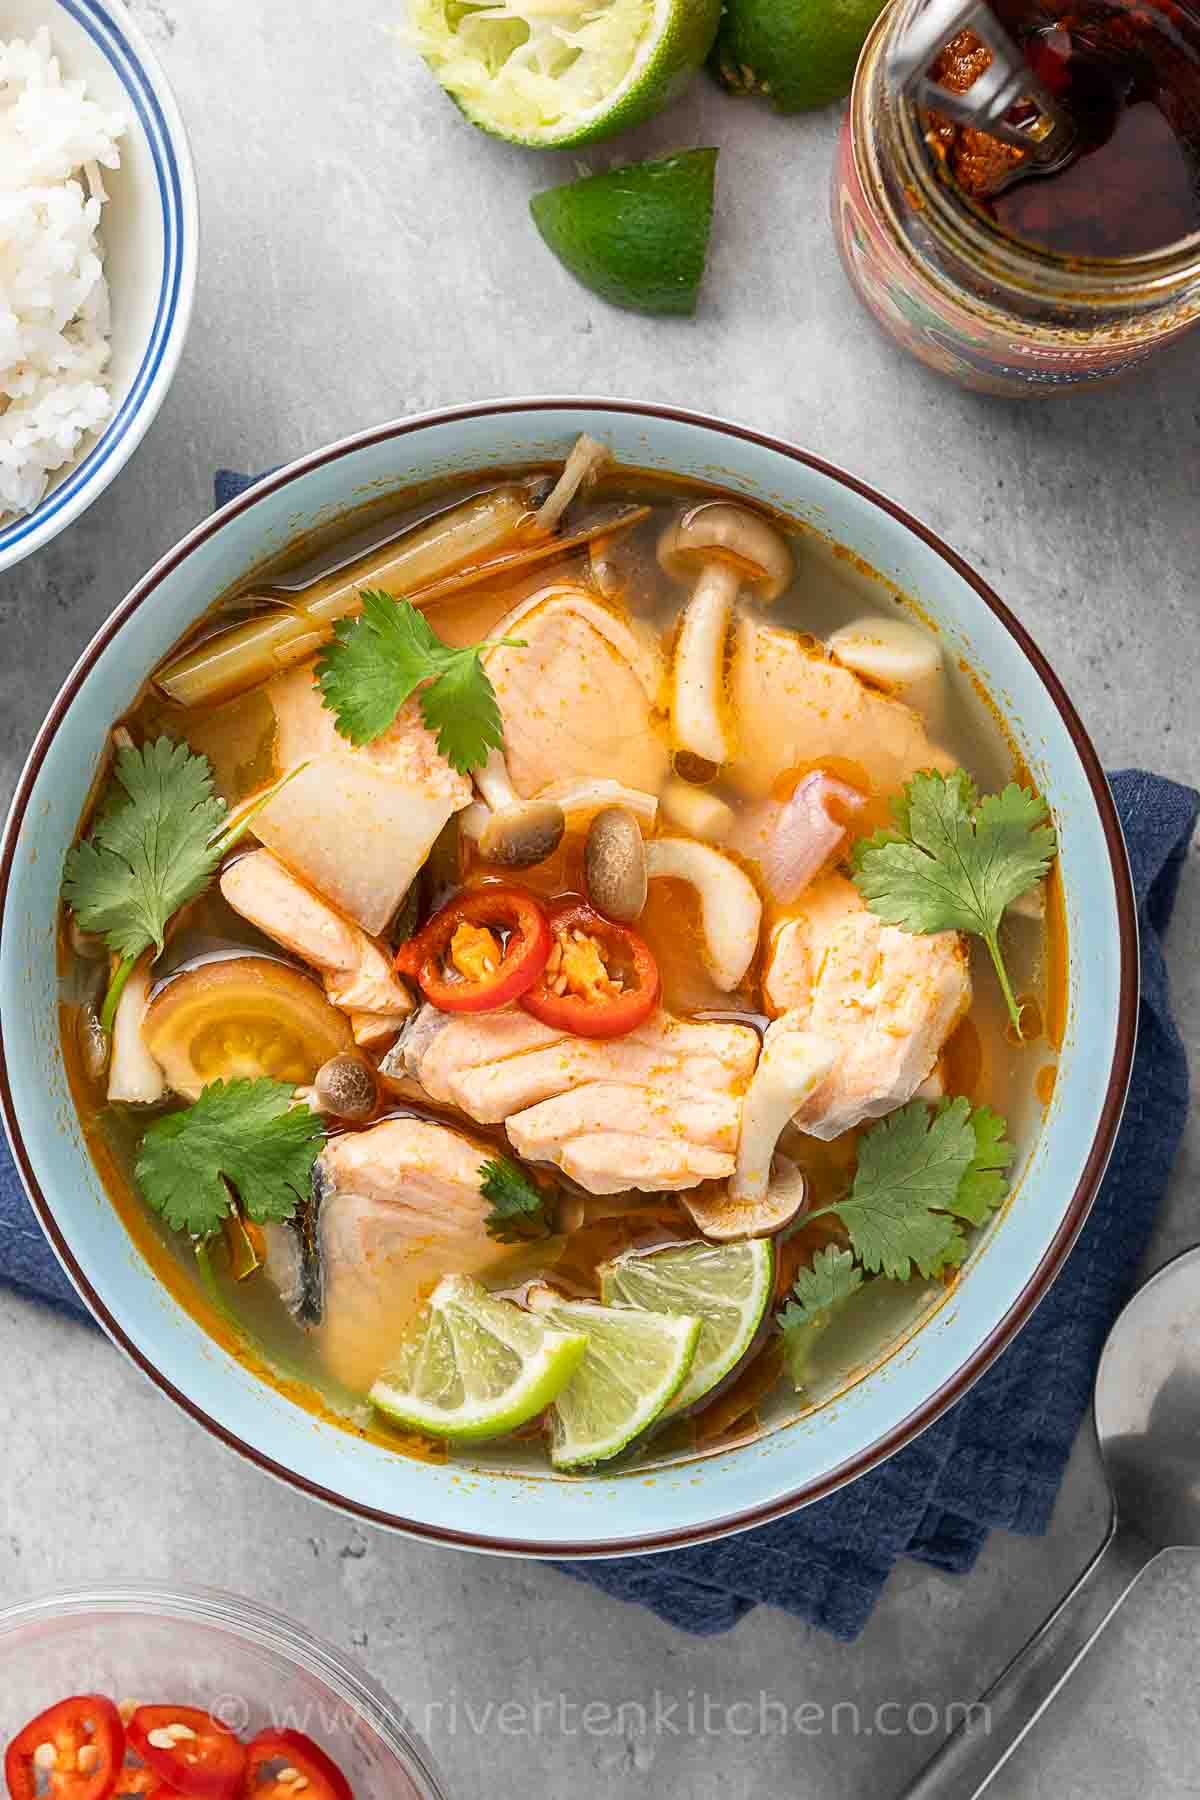 tom yum soup made of salmon fillet and tom yum paste.